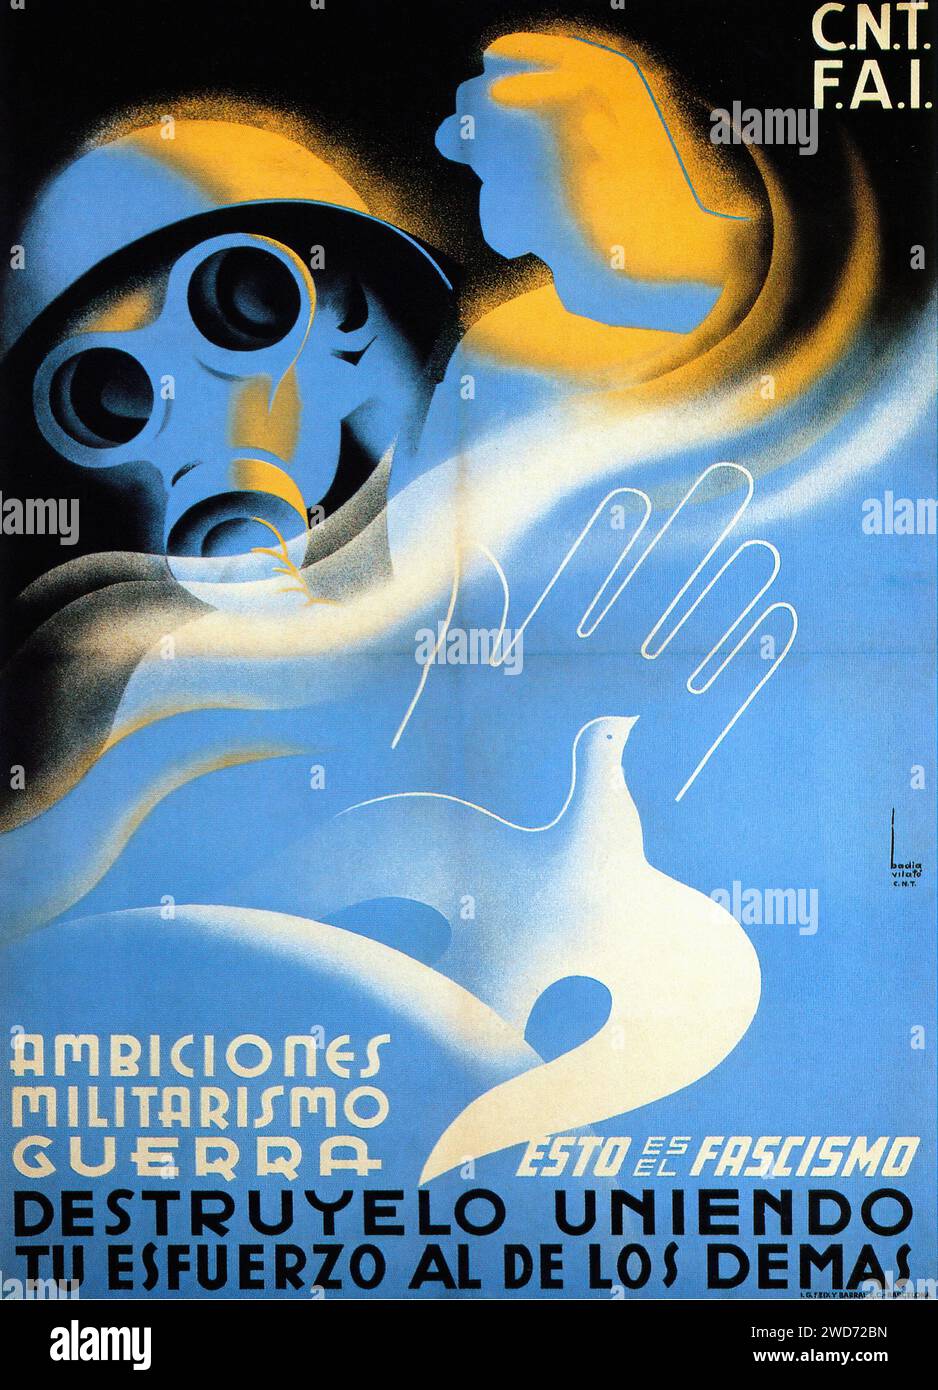 'Esto es fascismo - Ambiciones militarismo guerra' 'This is fascism - Ambitions militarism war' An abstract composition features a gas mask and a dove, juxtaposing war and peace. The style is surrealist with a blend of sharp contrasts and fluid forms. - Spanish Civil War (Guerra Civil Española) Propaganda Poster Stock Photo